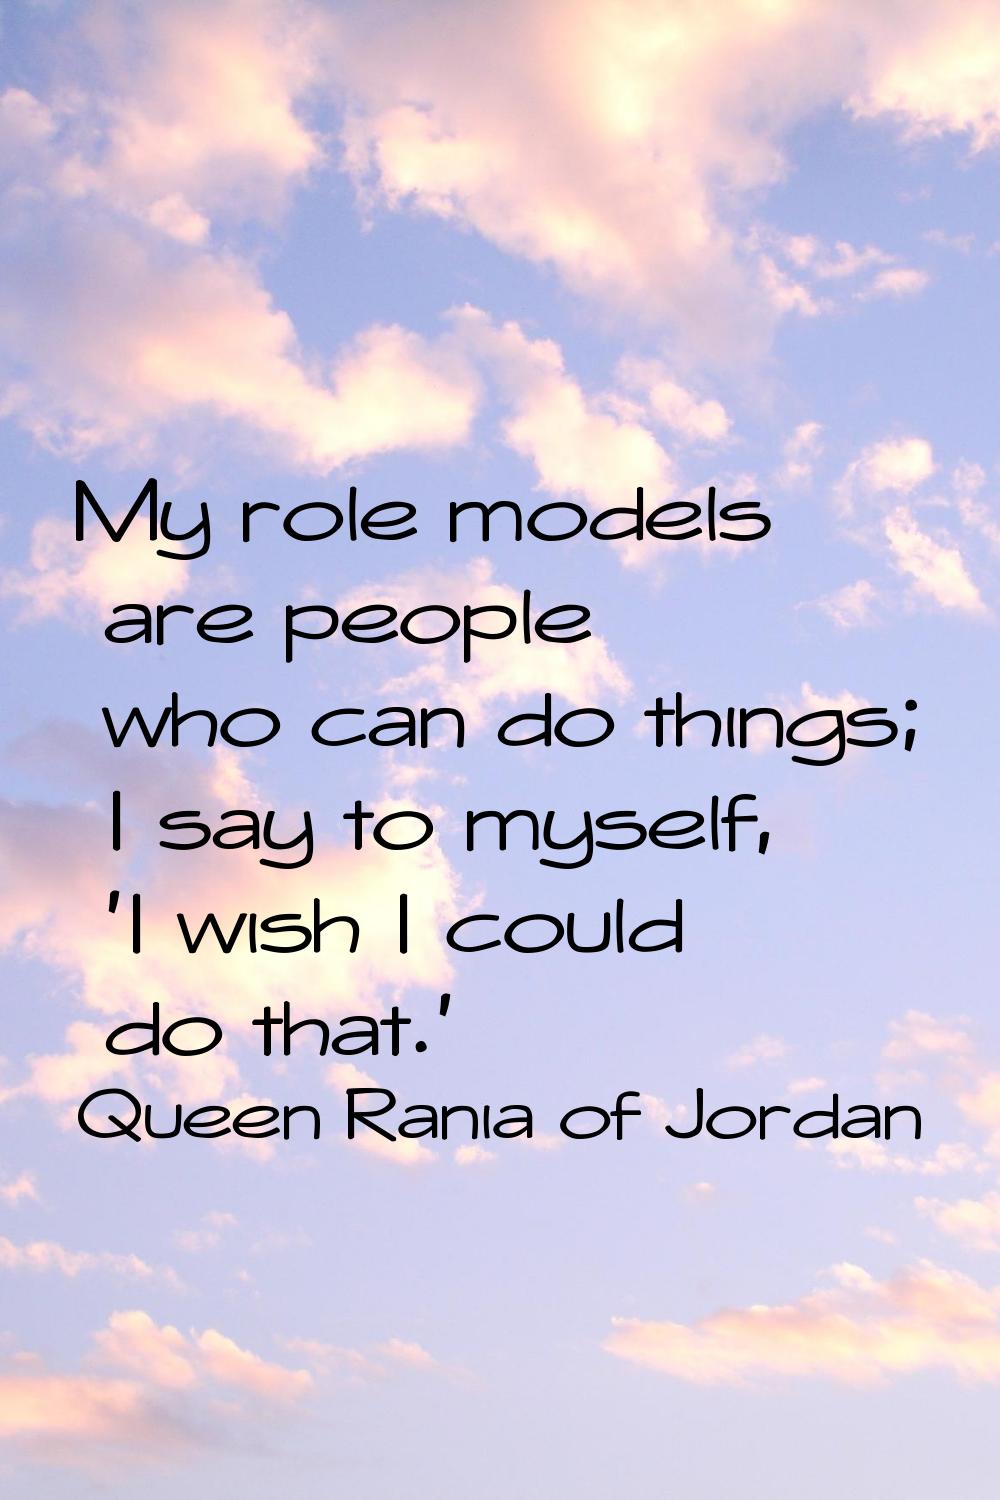 My role models are people who can do things; I say to myself, 'I wish I could do that.'